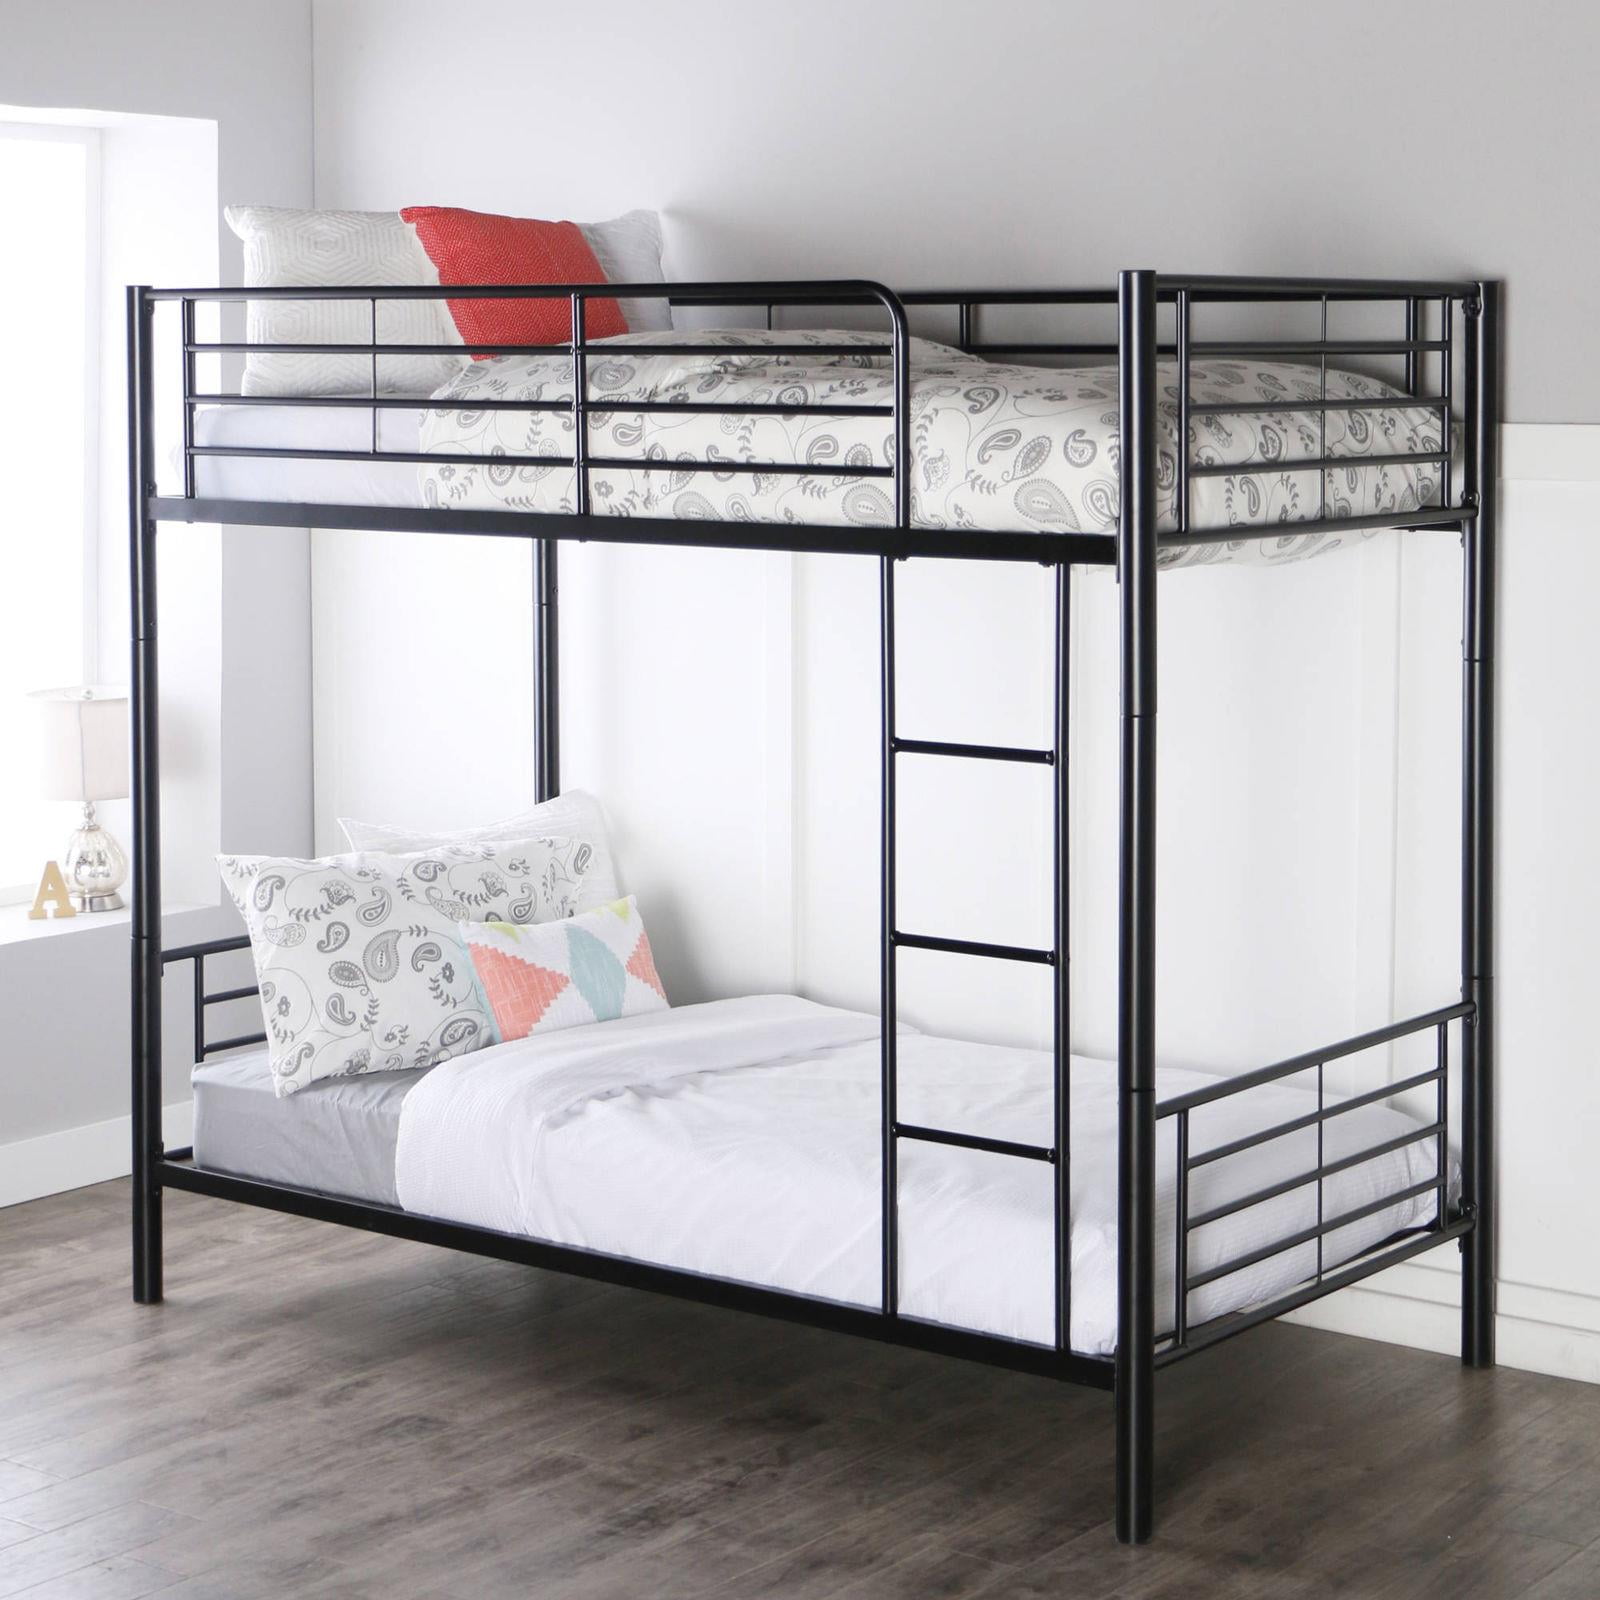 Ktaxon Twin Over Bunk Bed With, Twin Bunk Bed Design